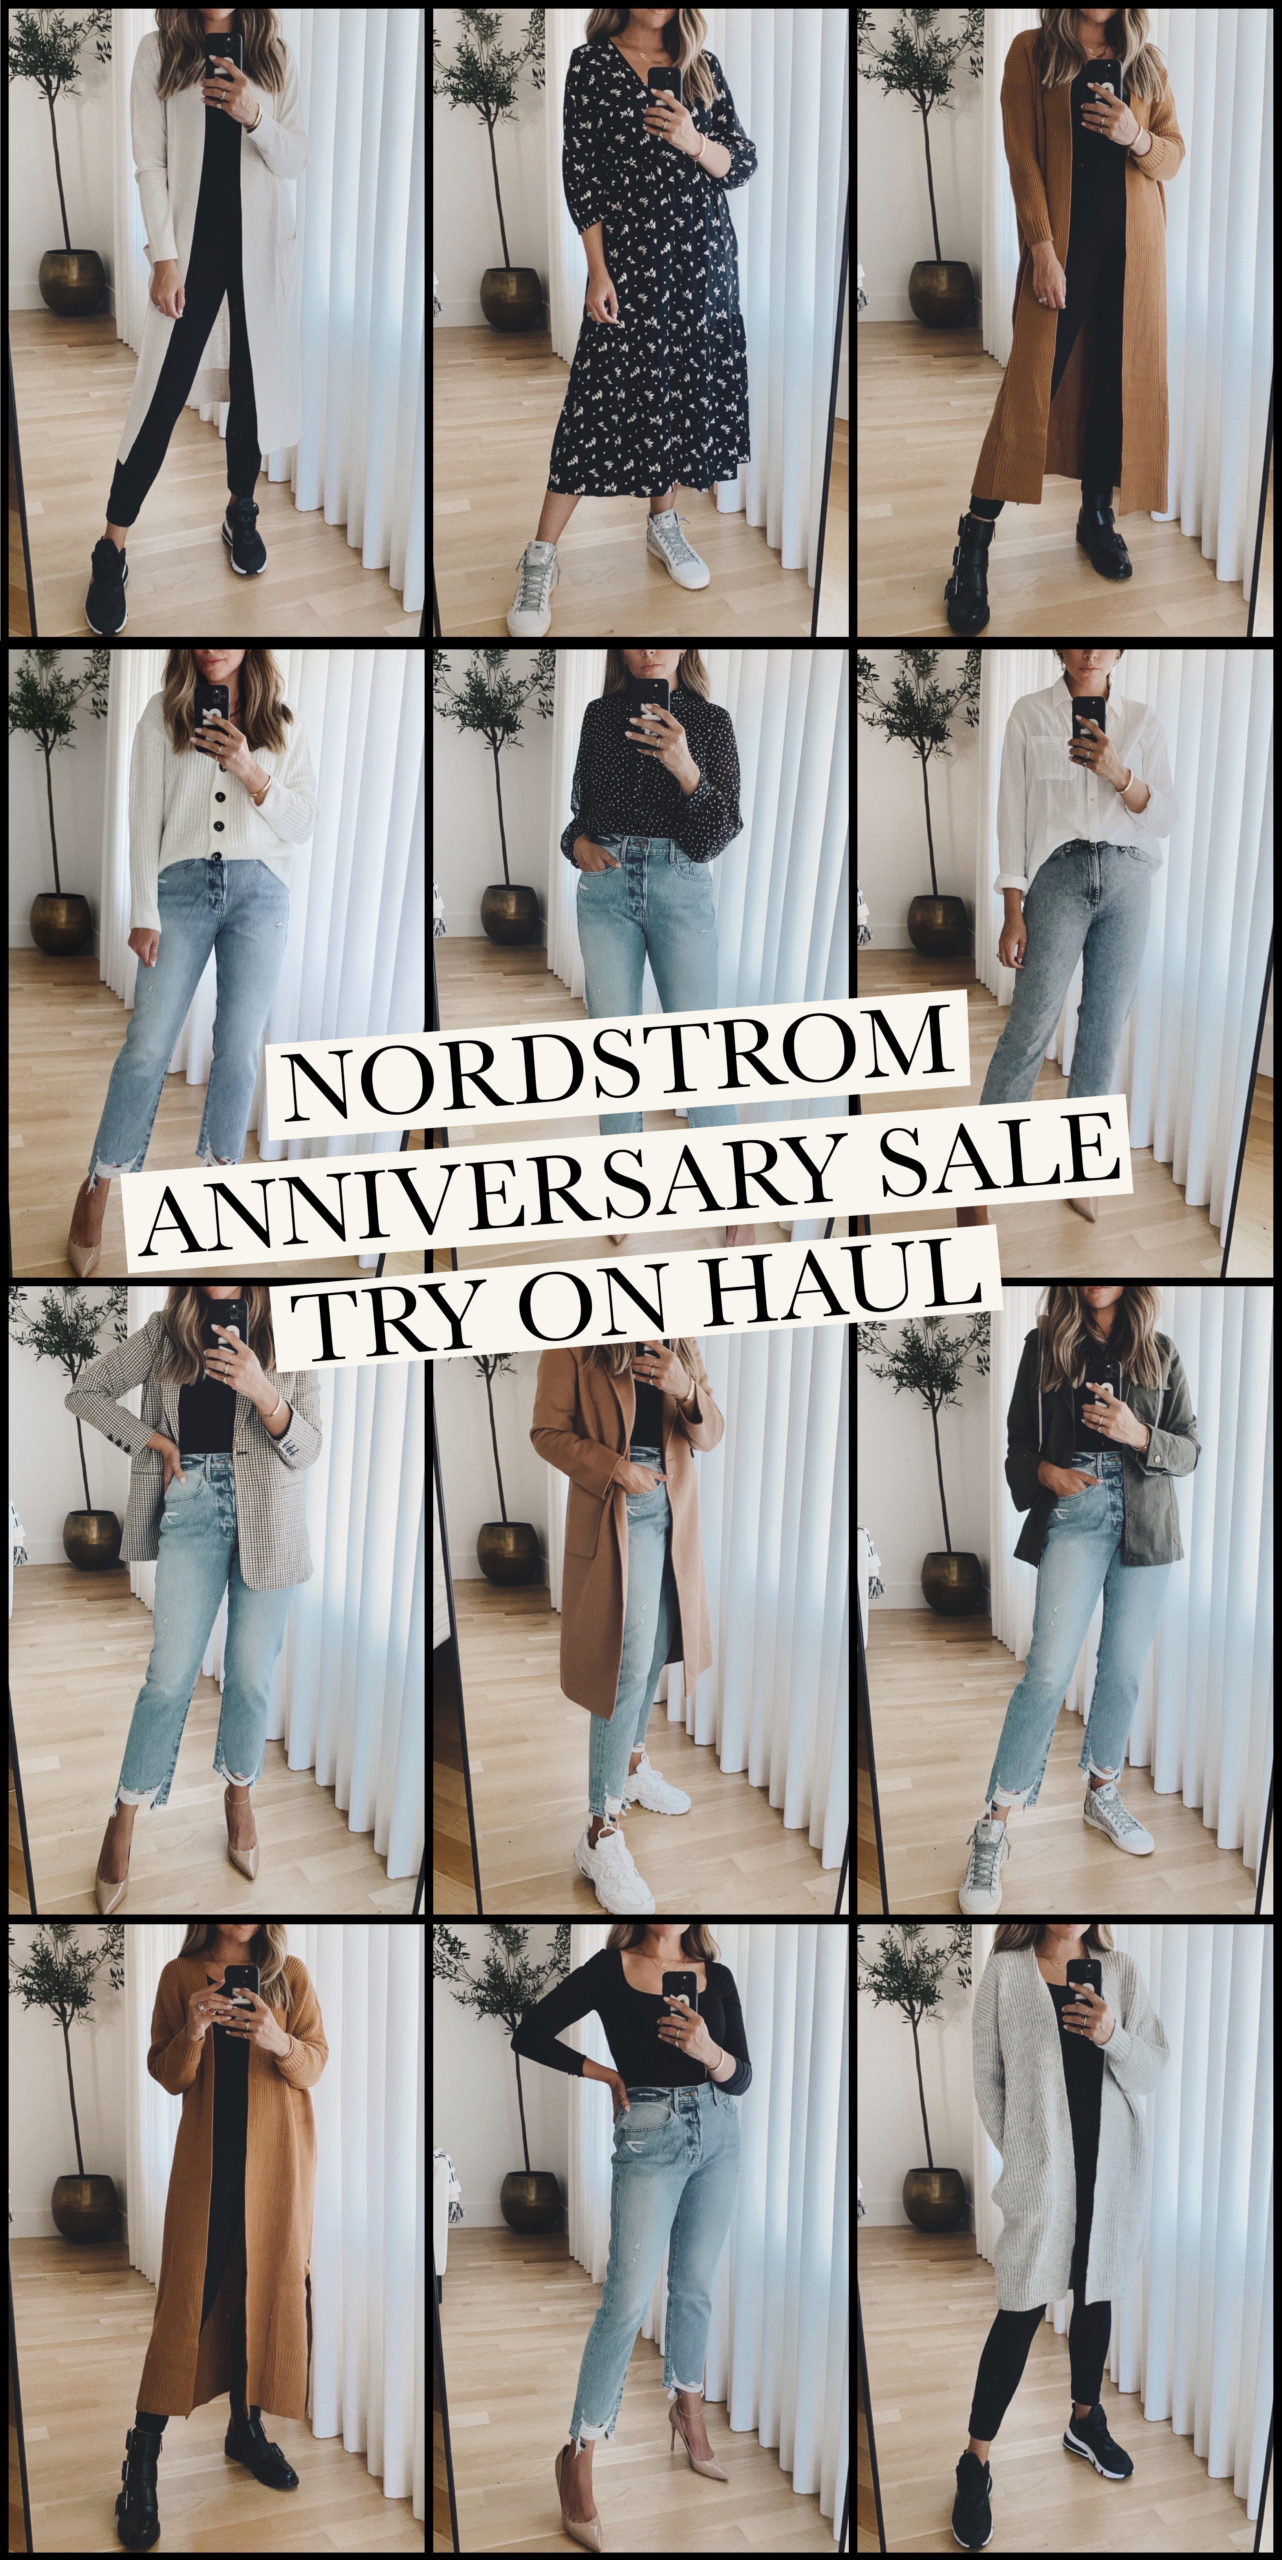 Nordstrom Anniversary Sale 2020 Try On